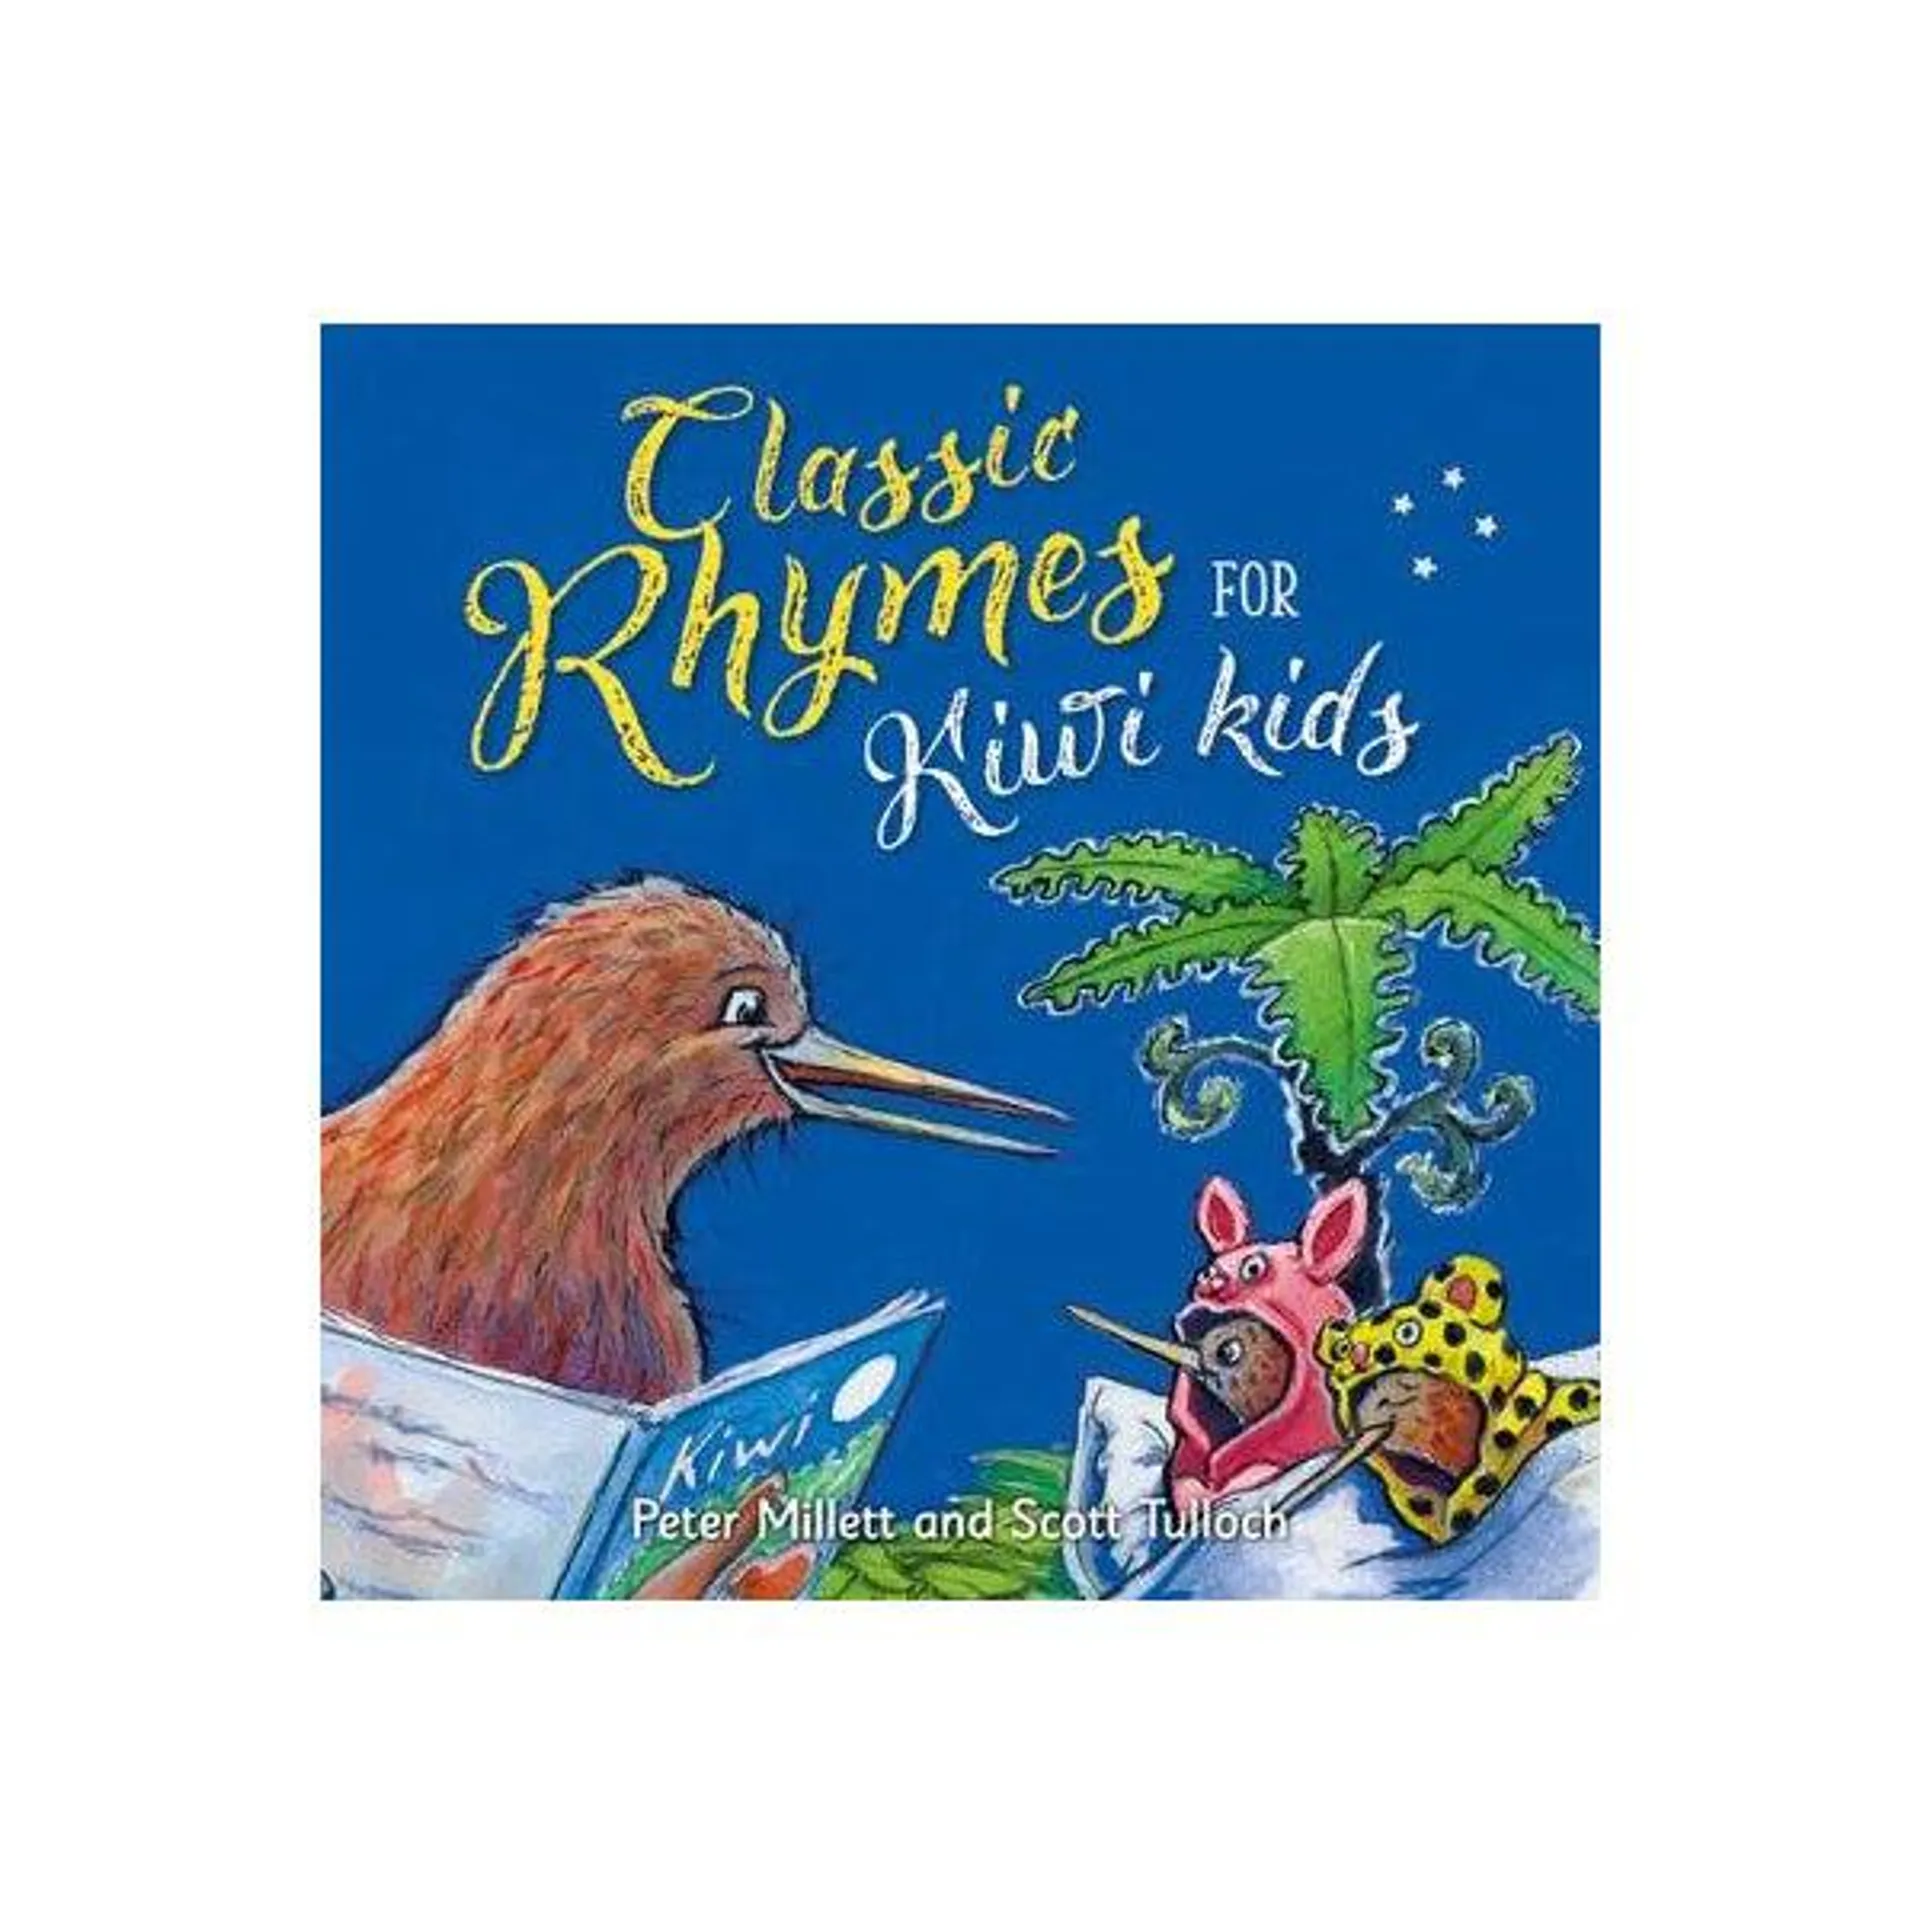 Classic Rhymes for Kiwi Kids Paperback